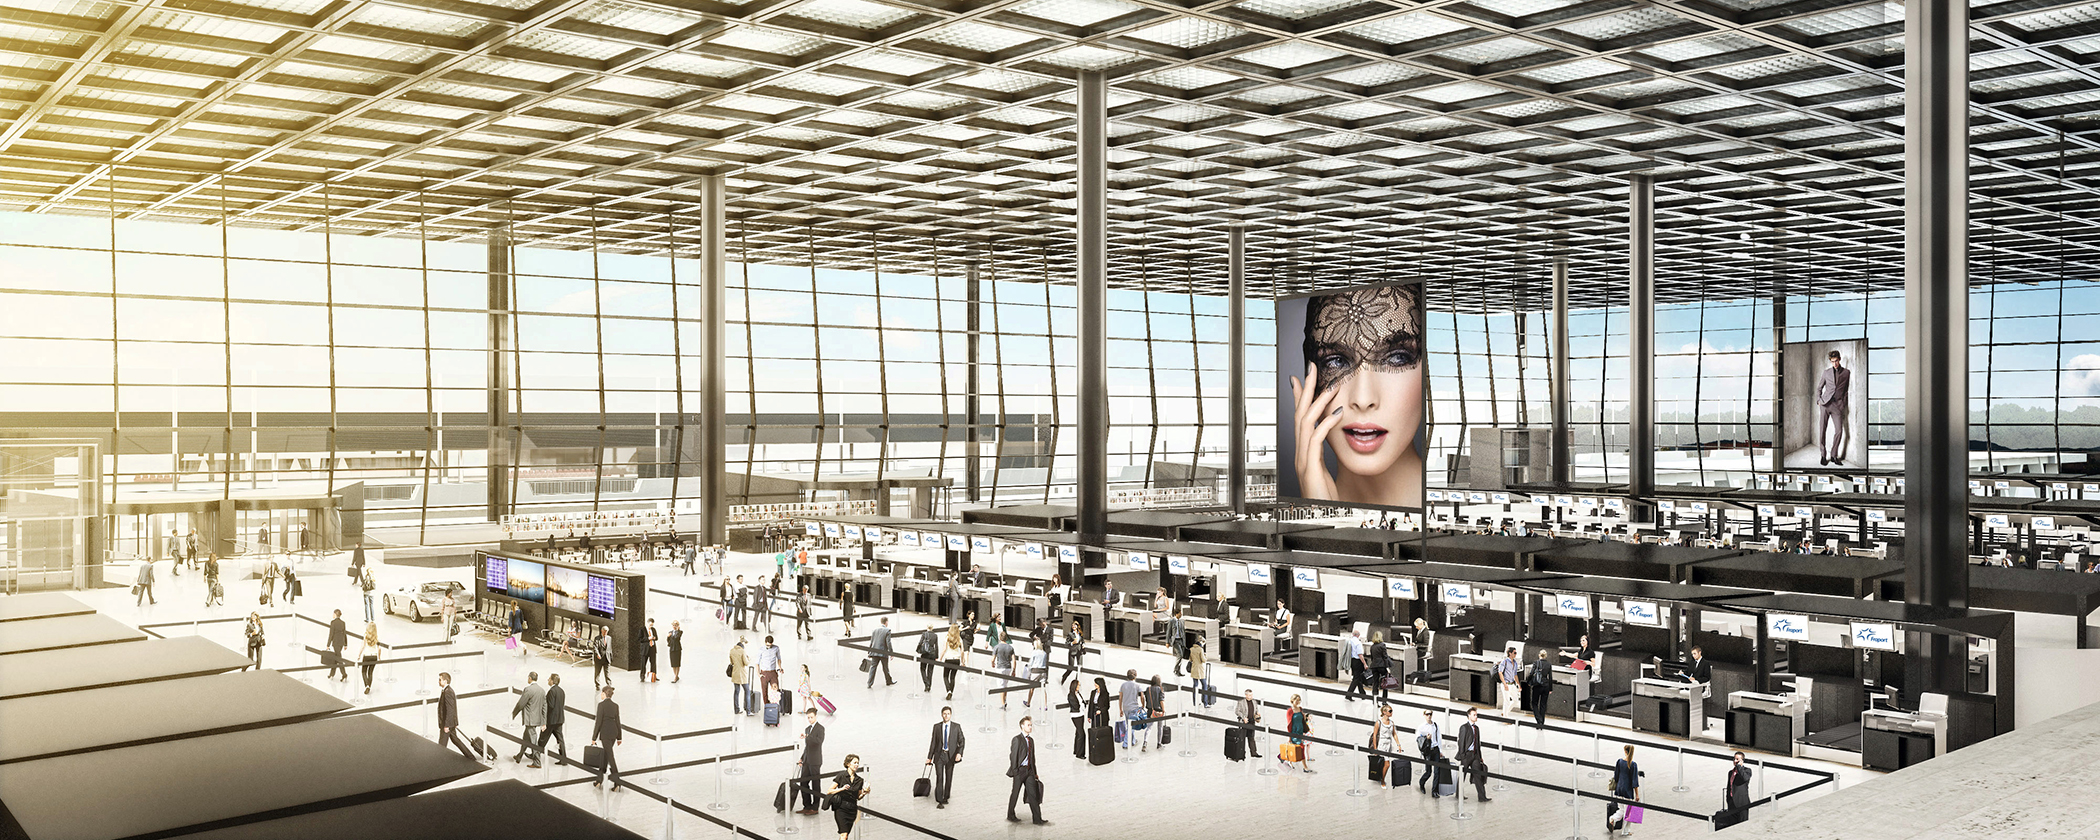 Check-in area at Frankfurt Airport’s new Terminal 3 where WSCAD’s software platform is being used to plan the building automation system. [Source: Fraport AG]